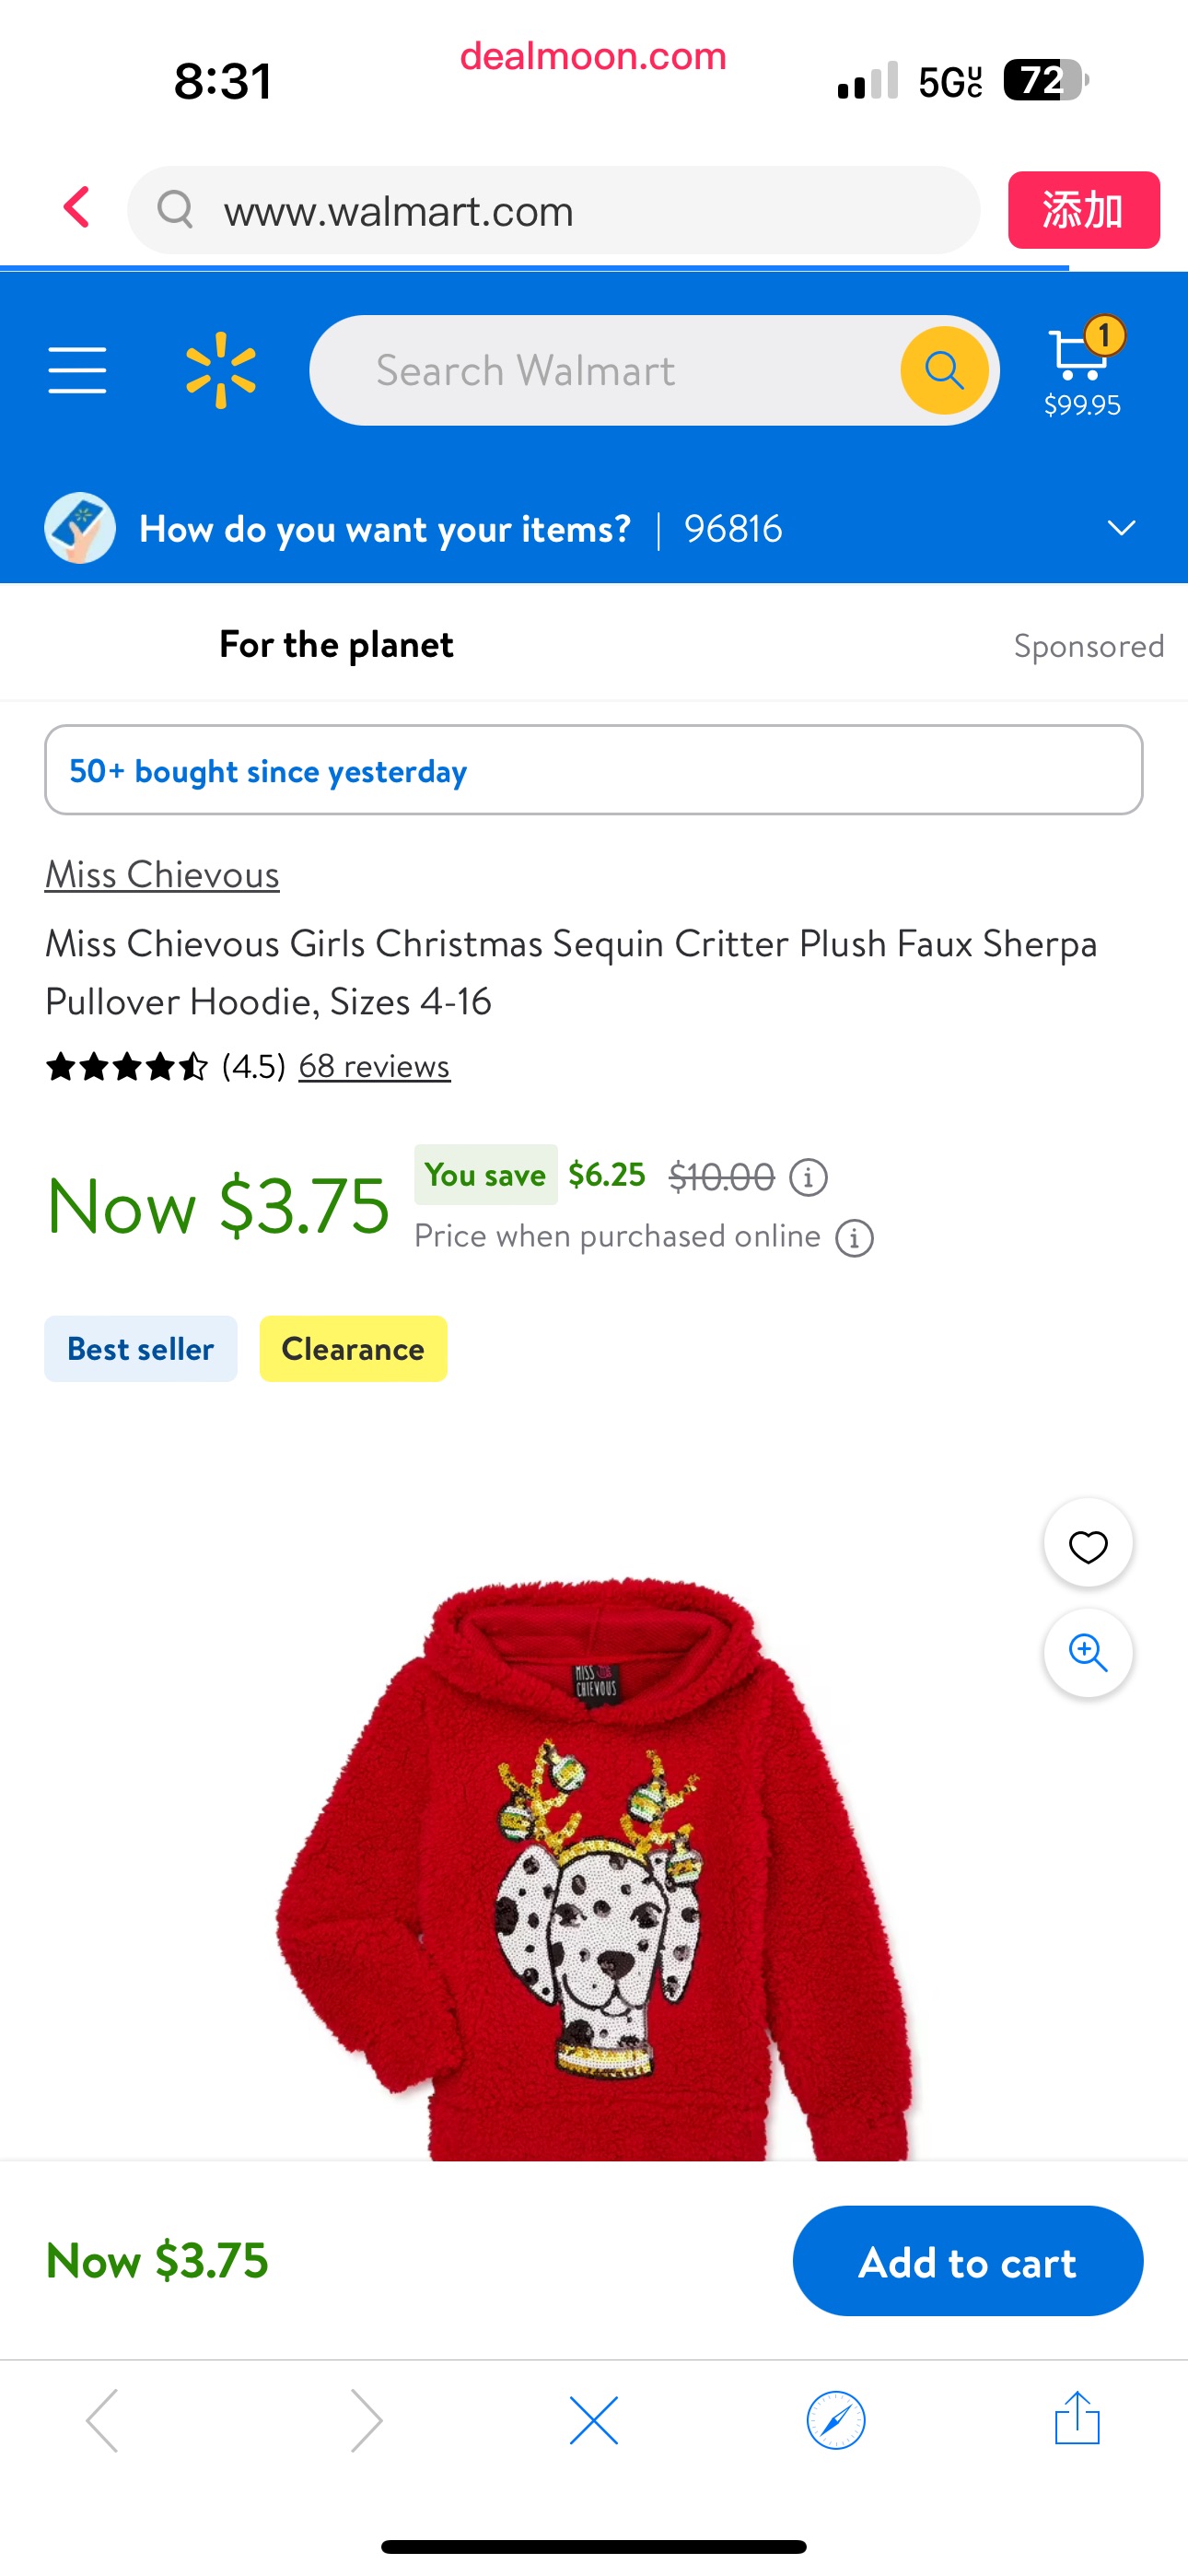 Miss Chievous Girls Christmas Sequin Critter Plush Faux Sherpa Pullover Hoodie, Sizes 4-16 - Walmart.com女童卫衣